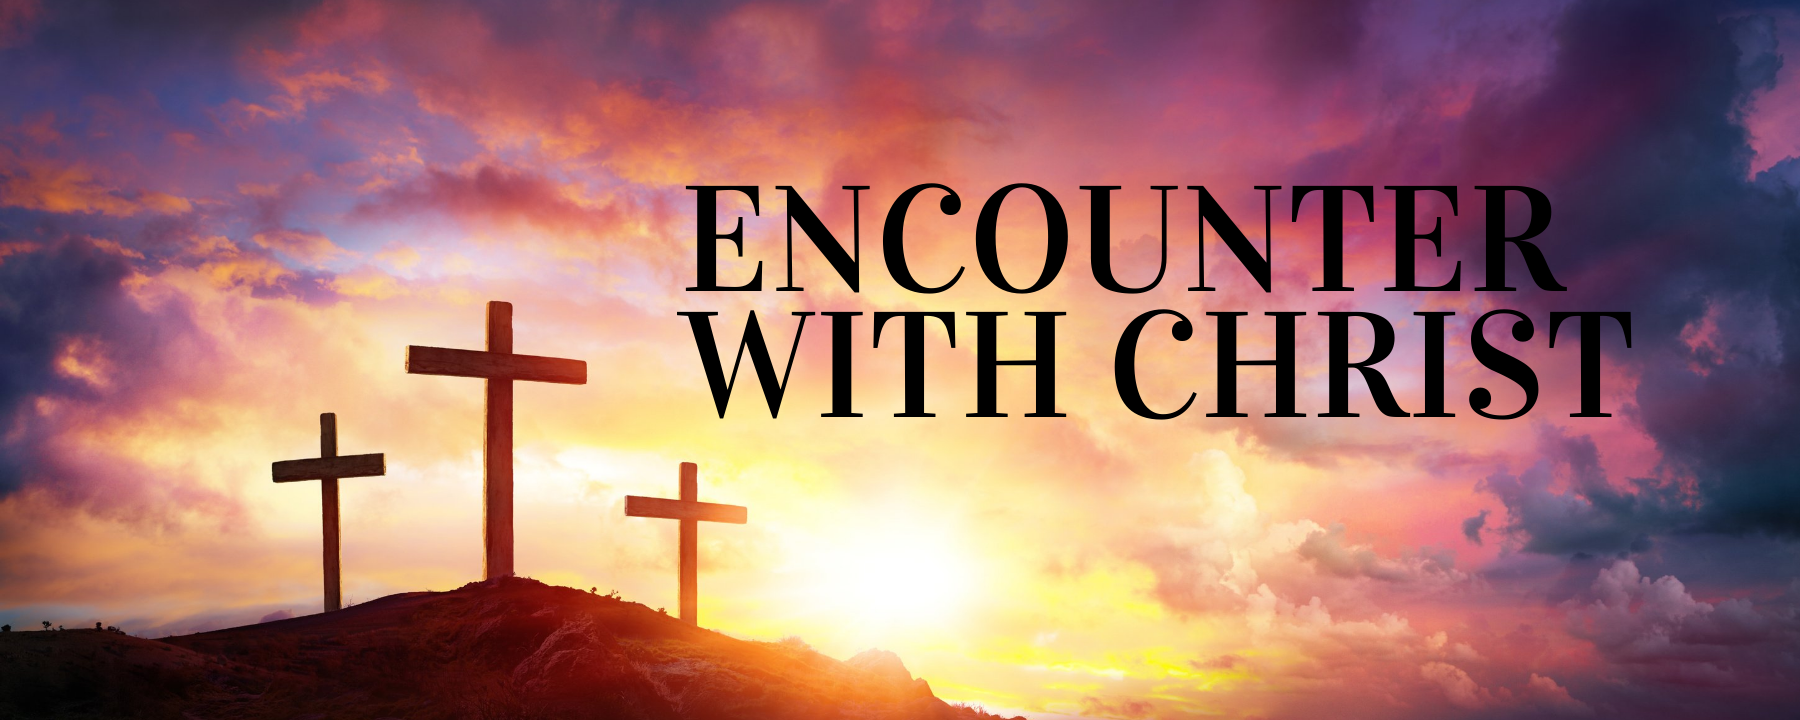 Encounter with Christ